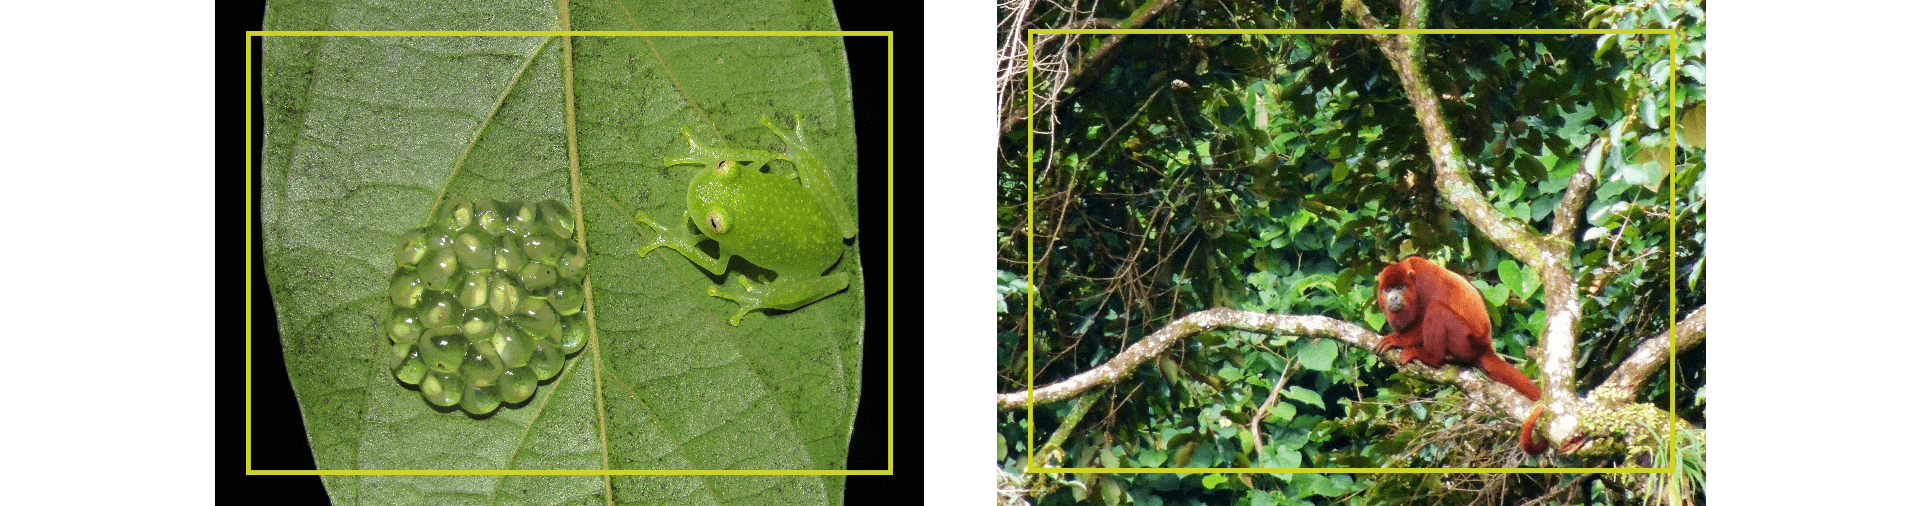 Fauna in conservation agreement areas · Glass Frog and Howler Monkey